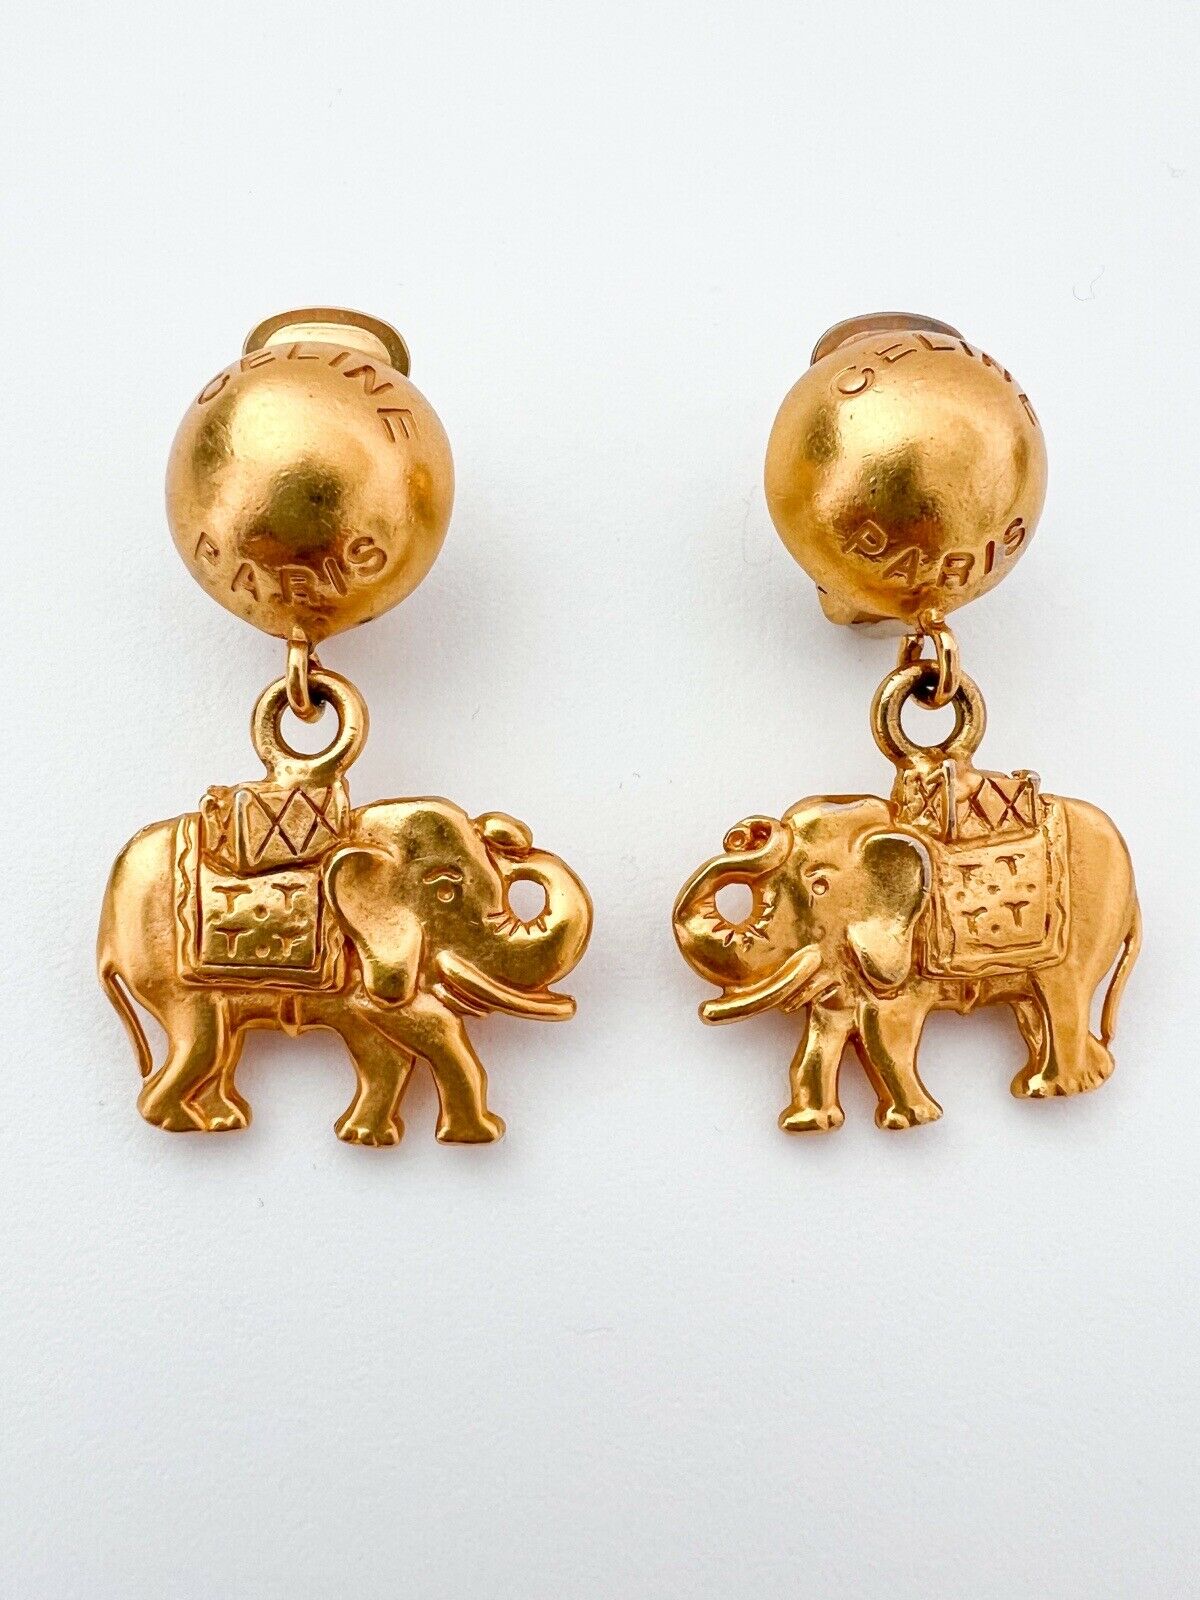 【SOLD OUT】Celine Paris Vintage Earrings Gold Tone Dangling Elephant Made in Italy